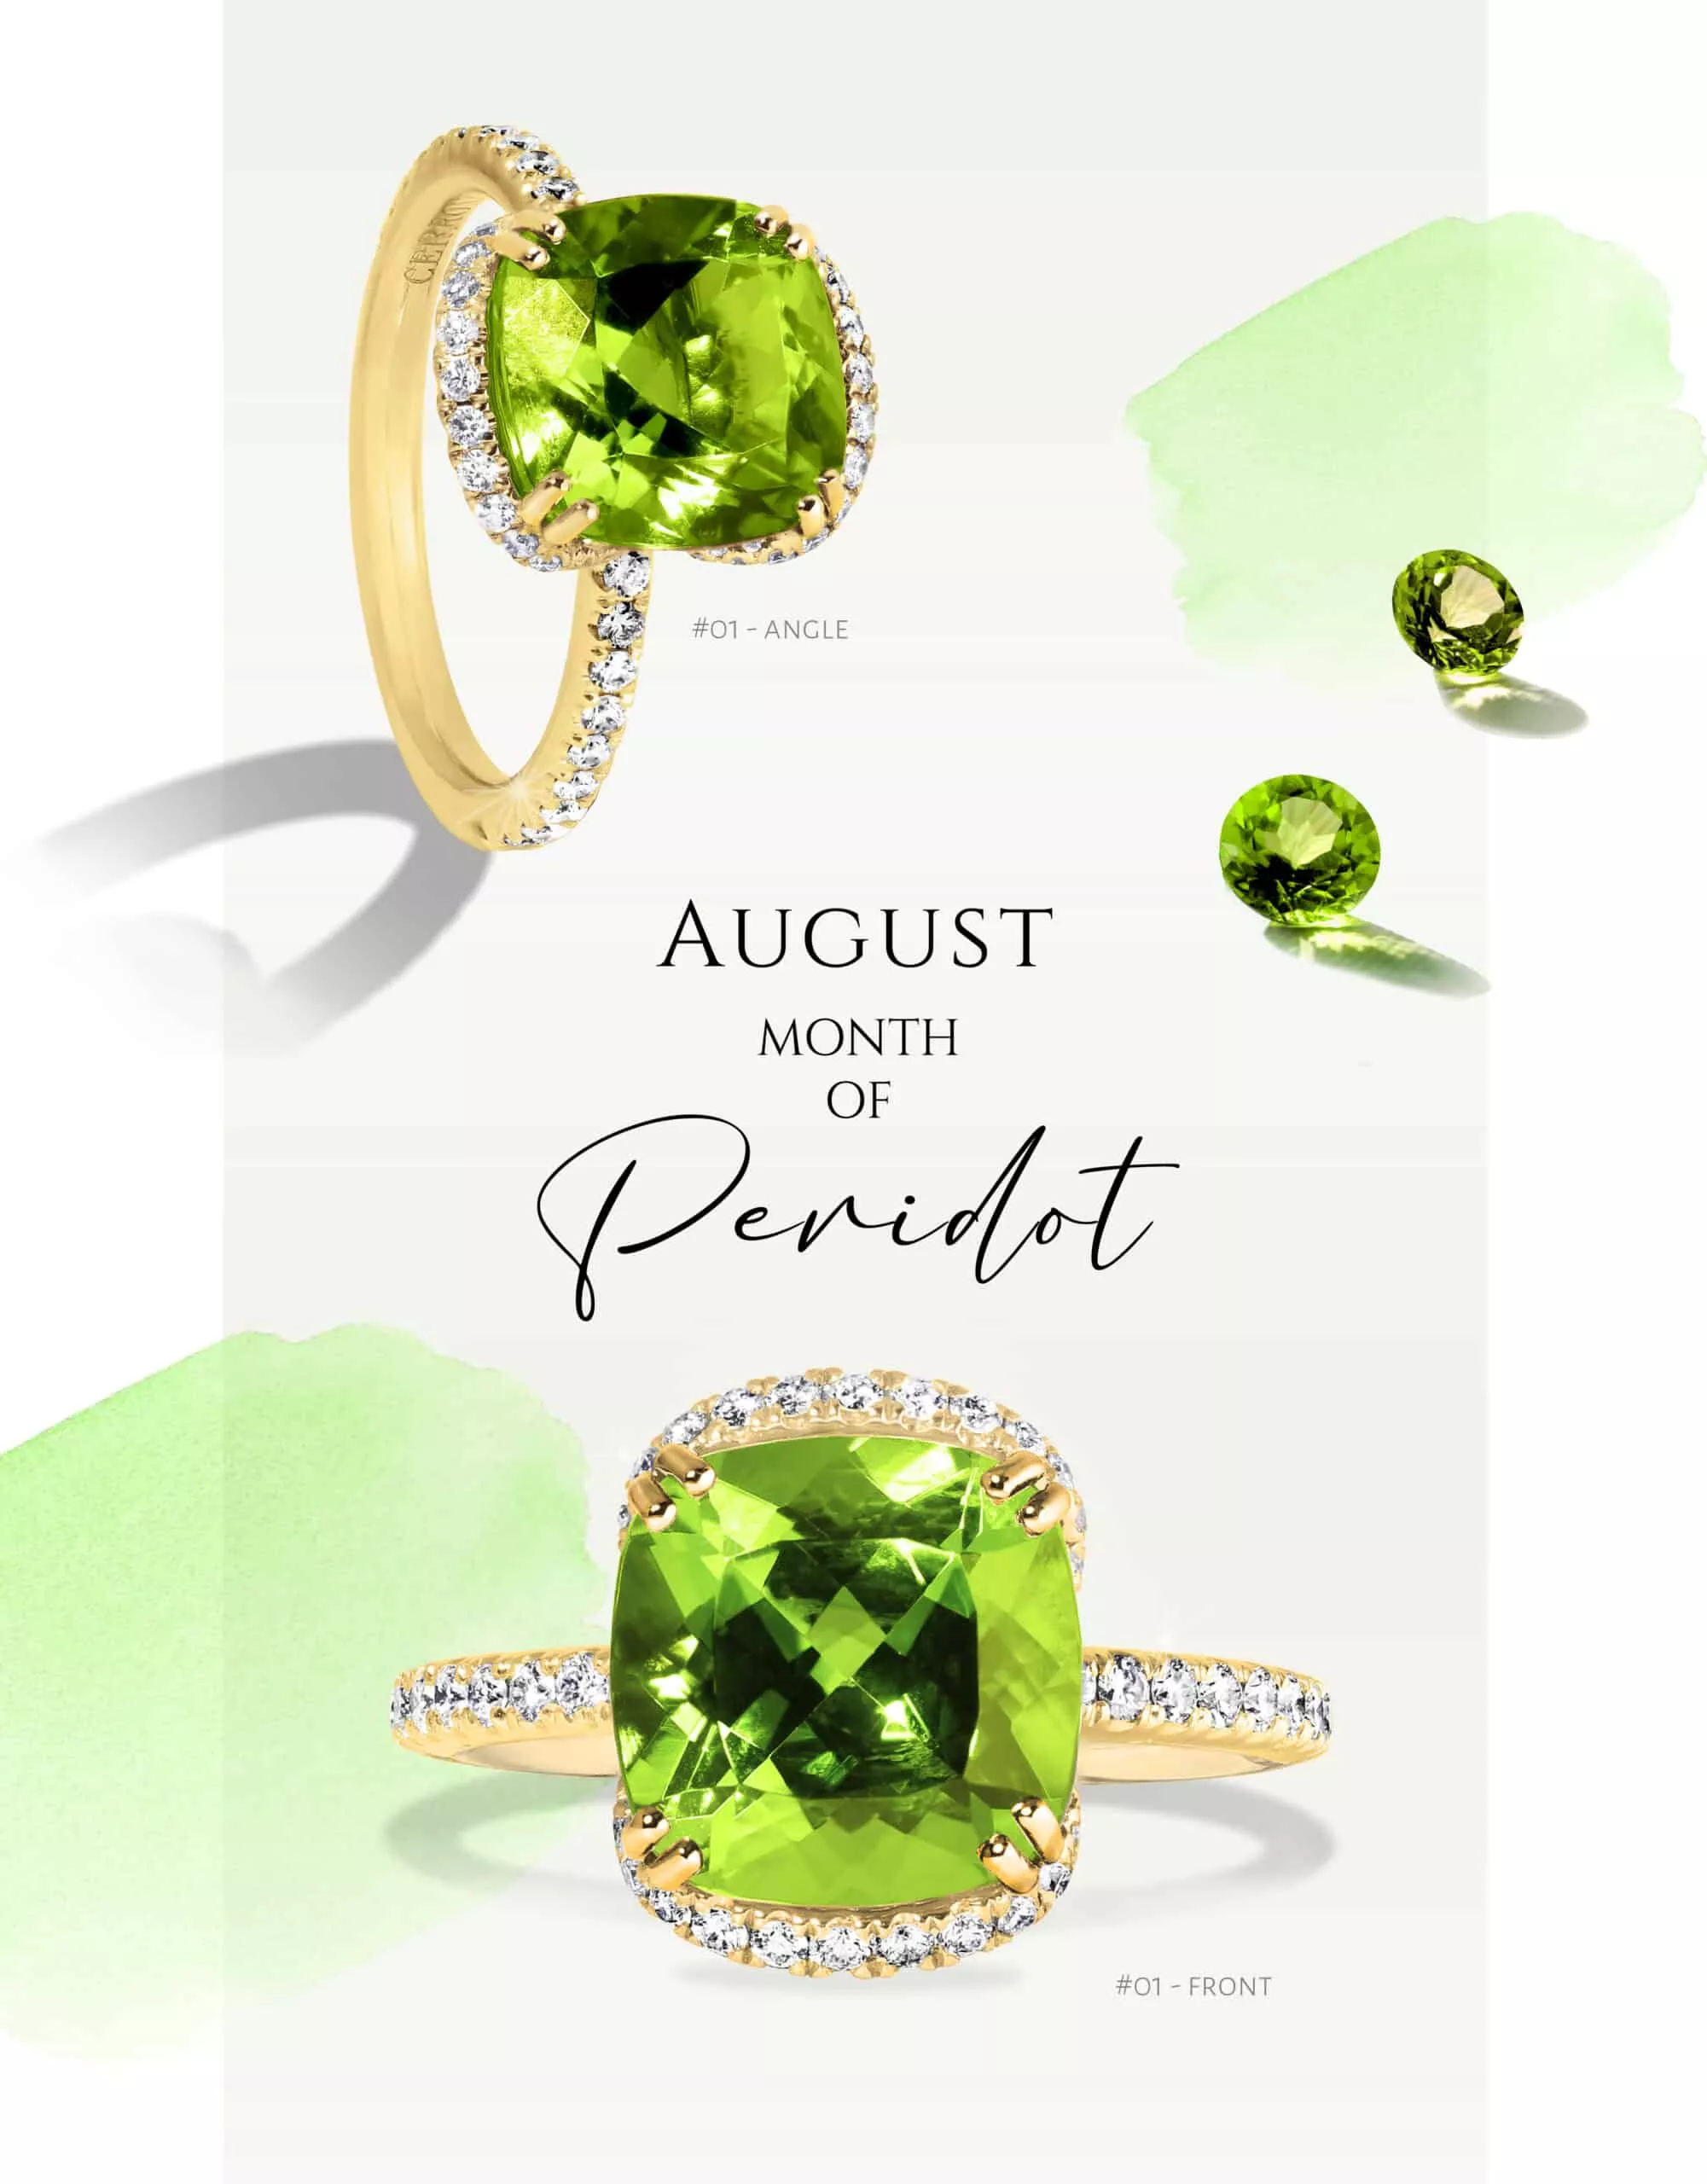 AUGUST - MONTH OF PERIDOT